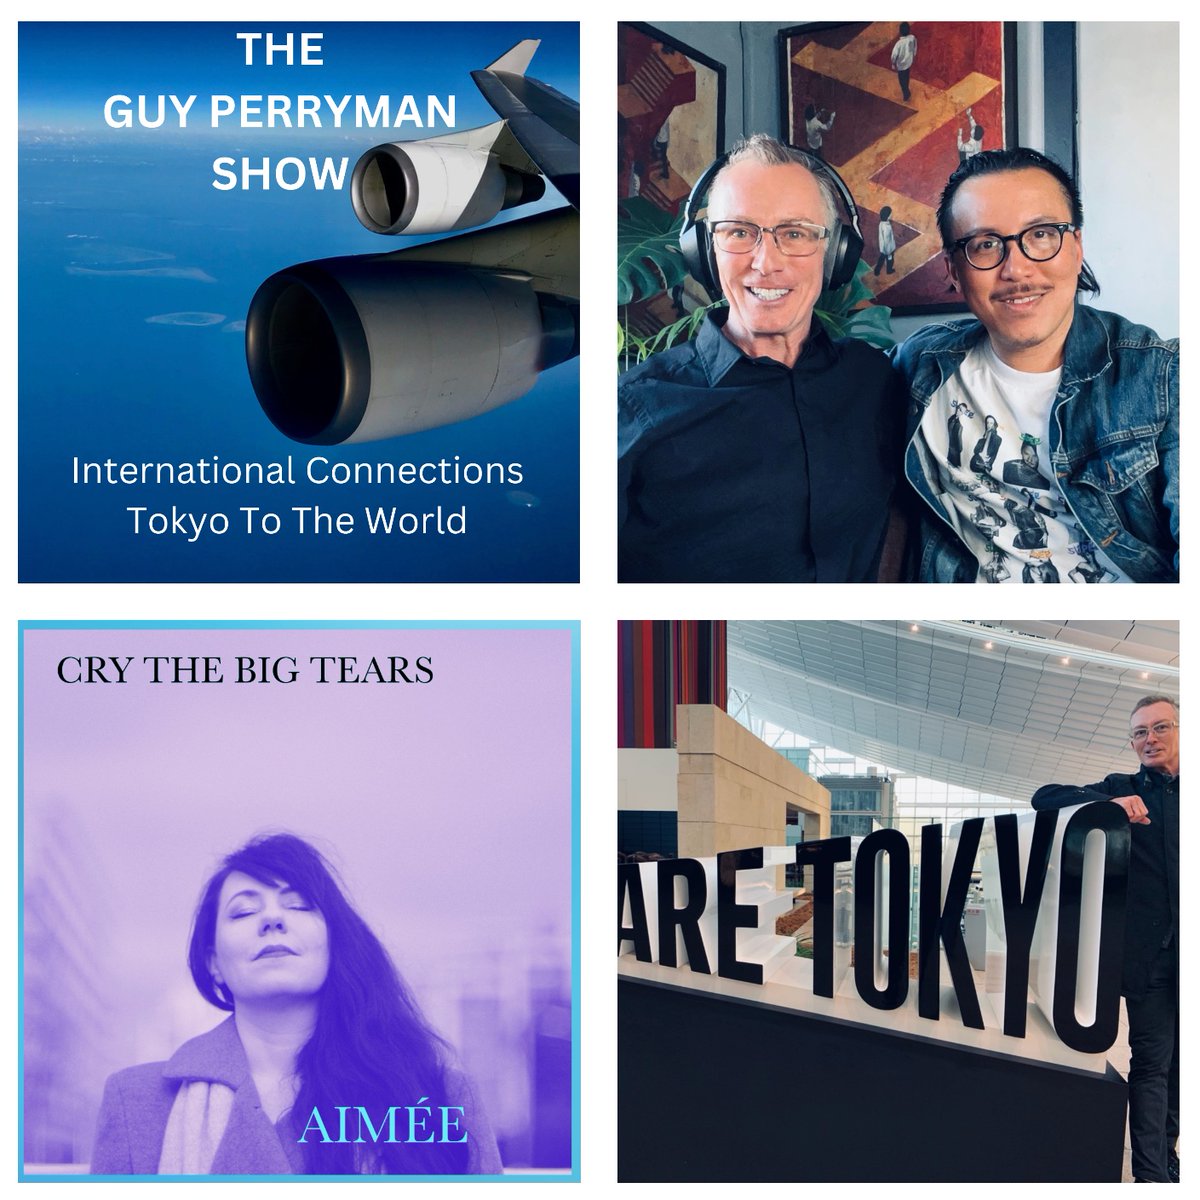 Lots of love from Tokyo with superstar photographer @lesliekeesuper interview, David Chester and Aimee message, a musical in Shibuya, Haneda Airport all with the music to match! #guyperryman GPS @InterFM897 Fri 5/17 On air interfm.co.jp On demand mixcloud.com/GuyPerryman/